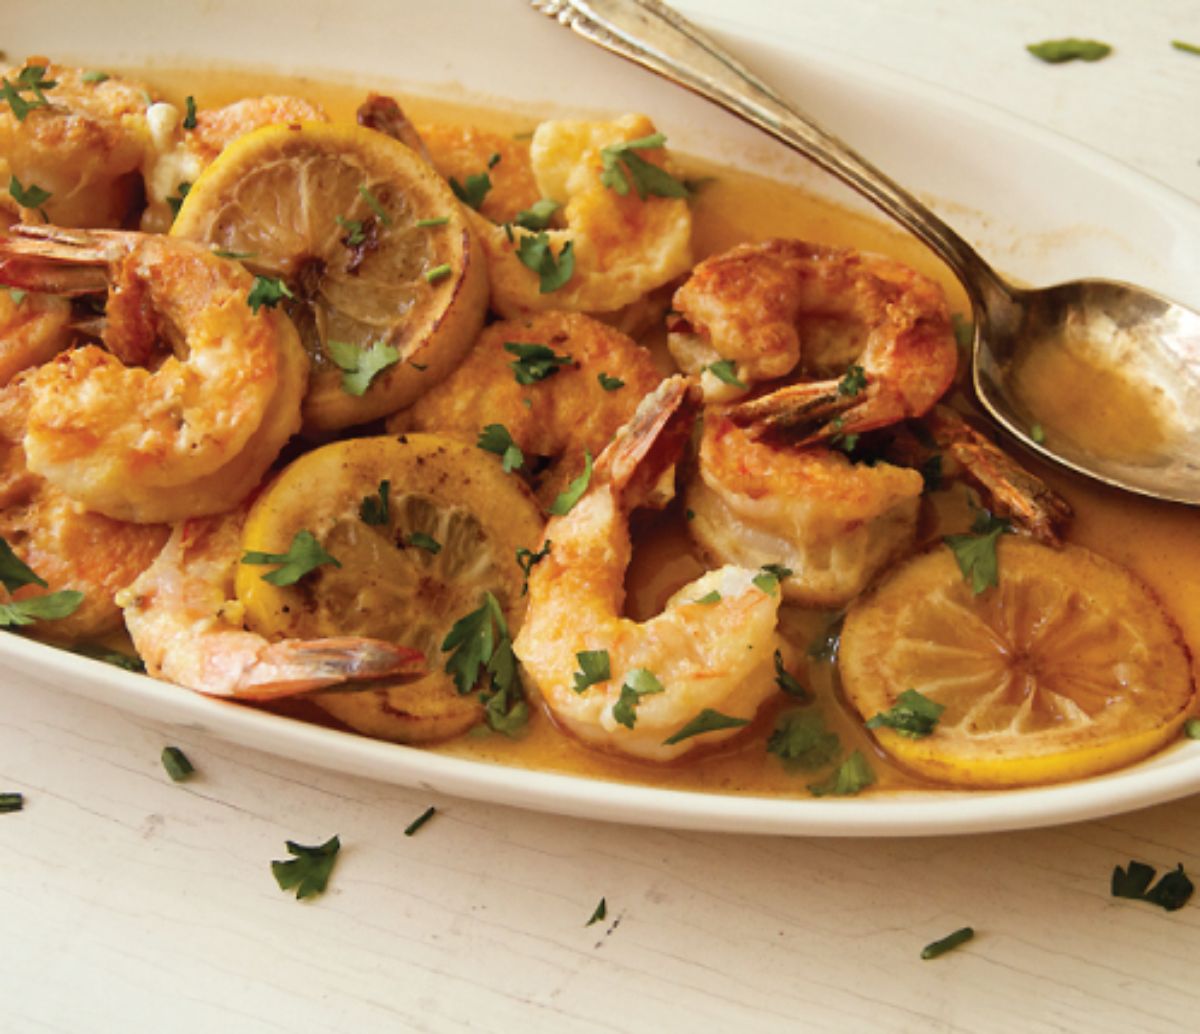 Juicy shrimp francese in a white bowl with a spoon.